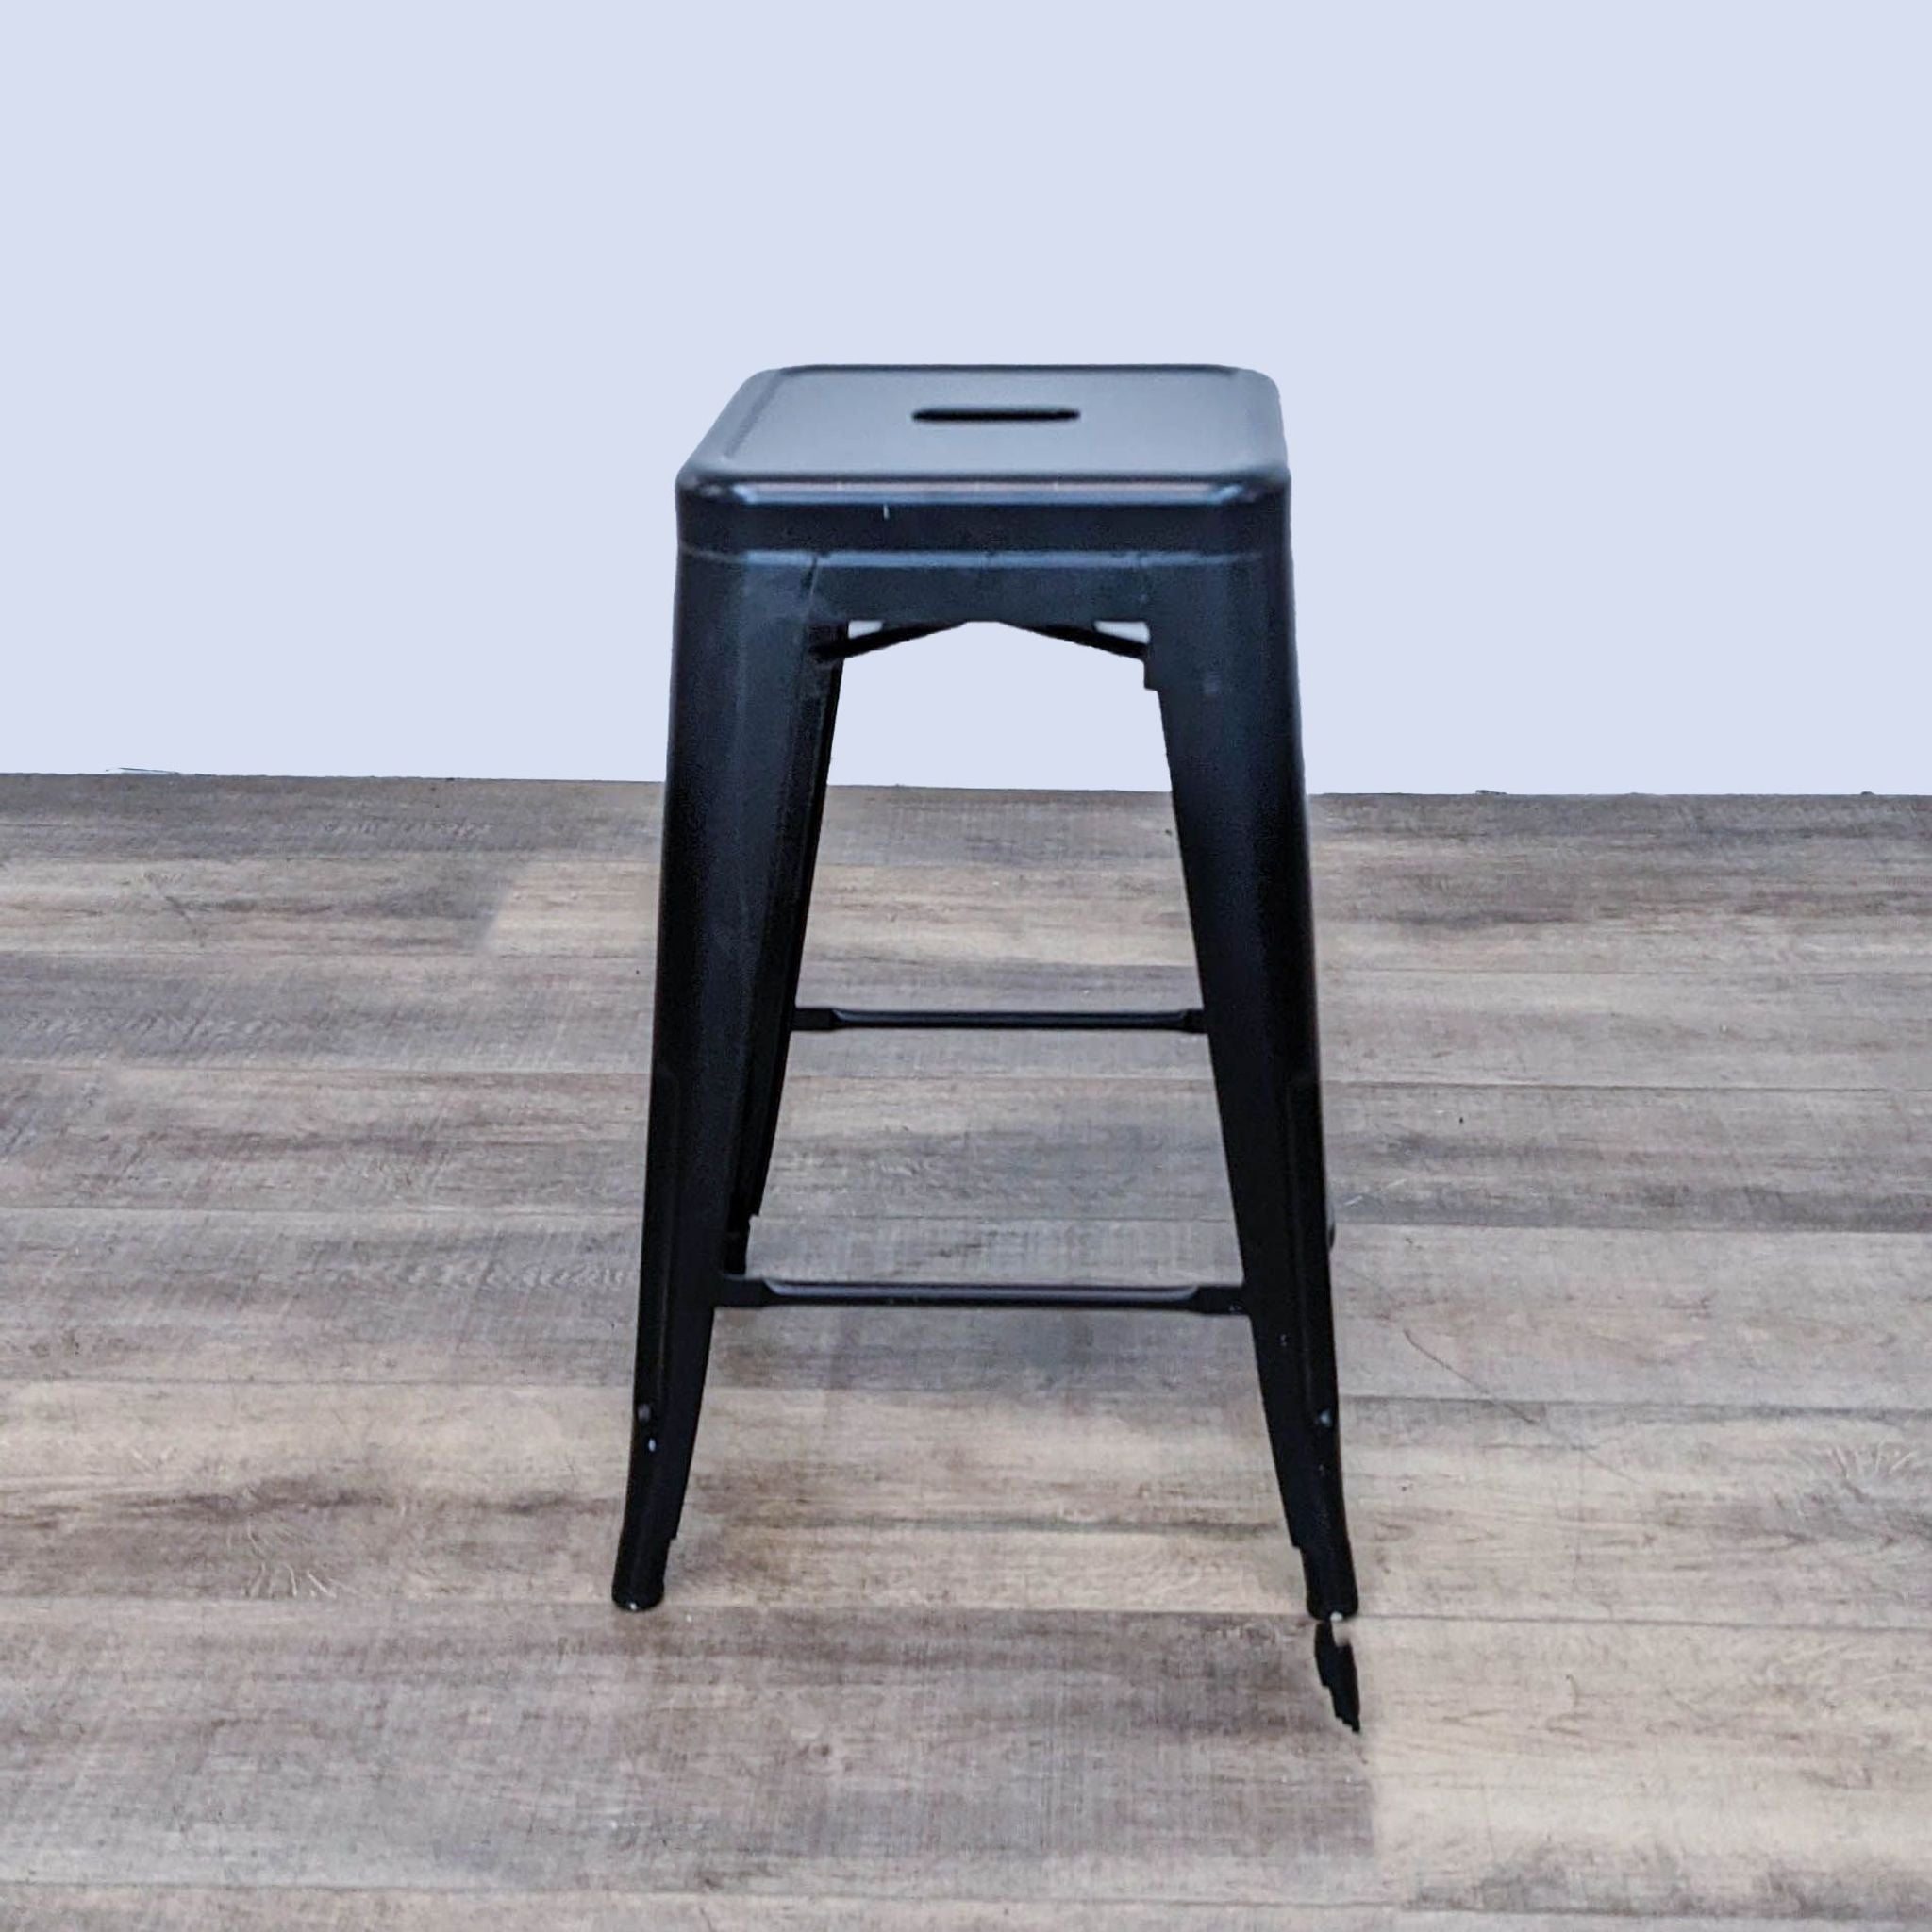 Reperch black metal counter stool with hole seat detailing on wooden floor.